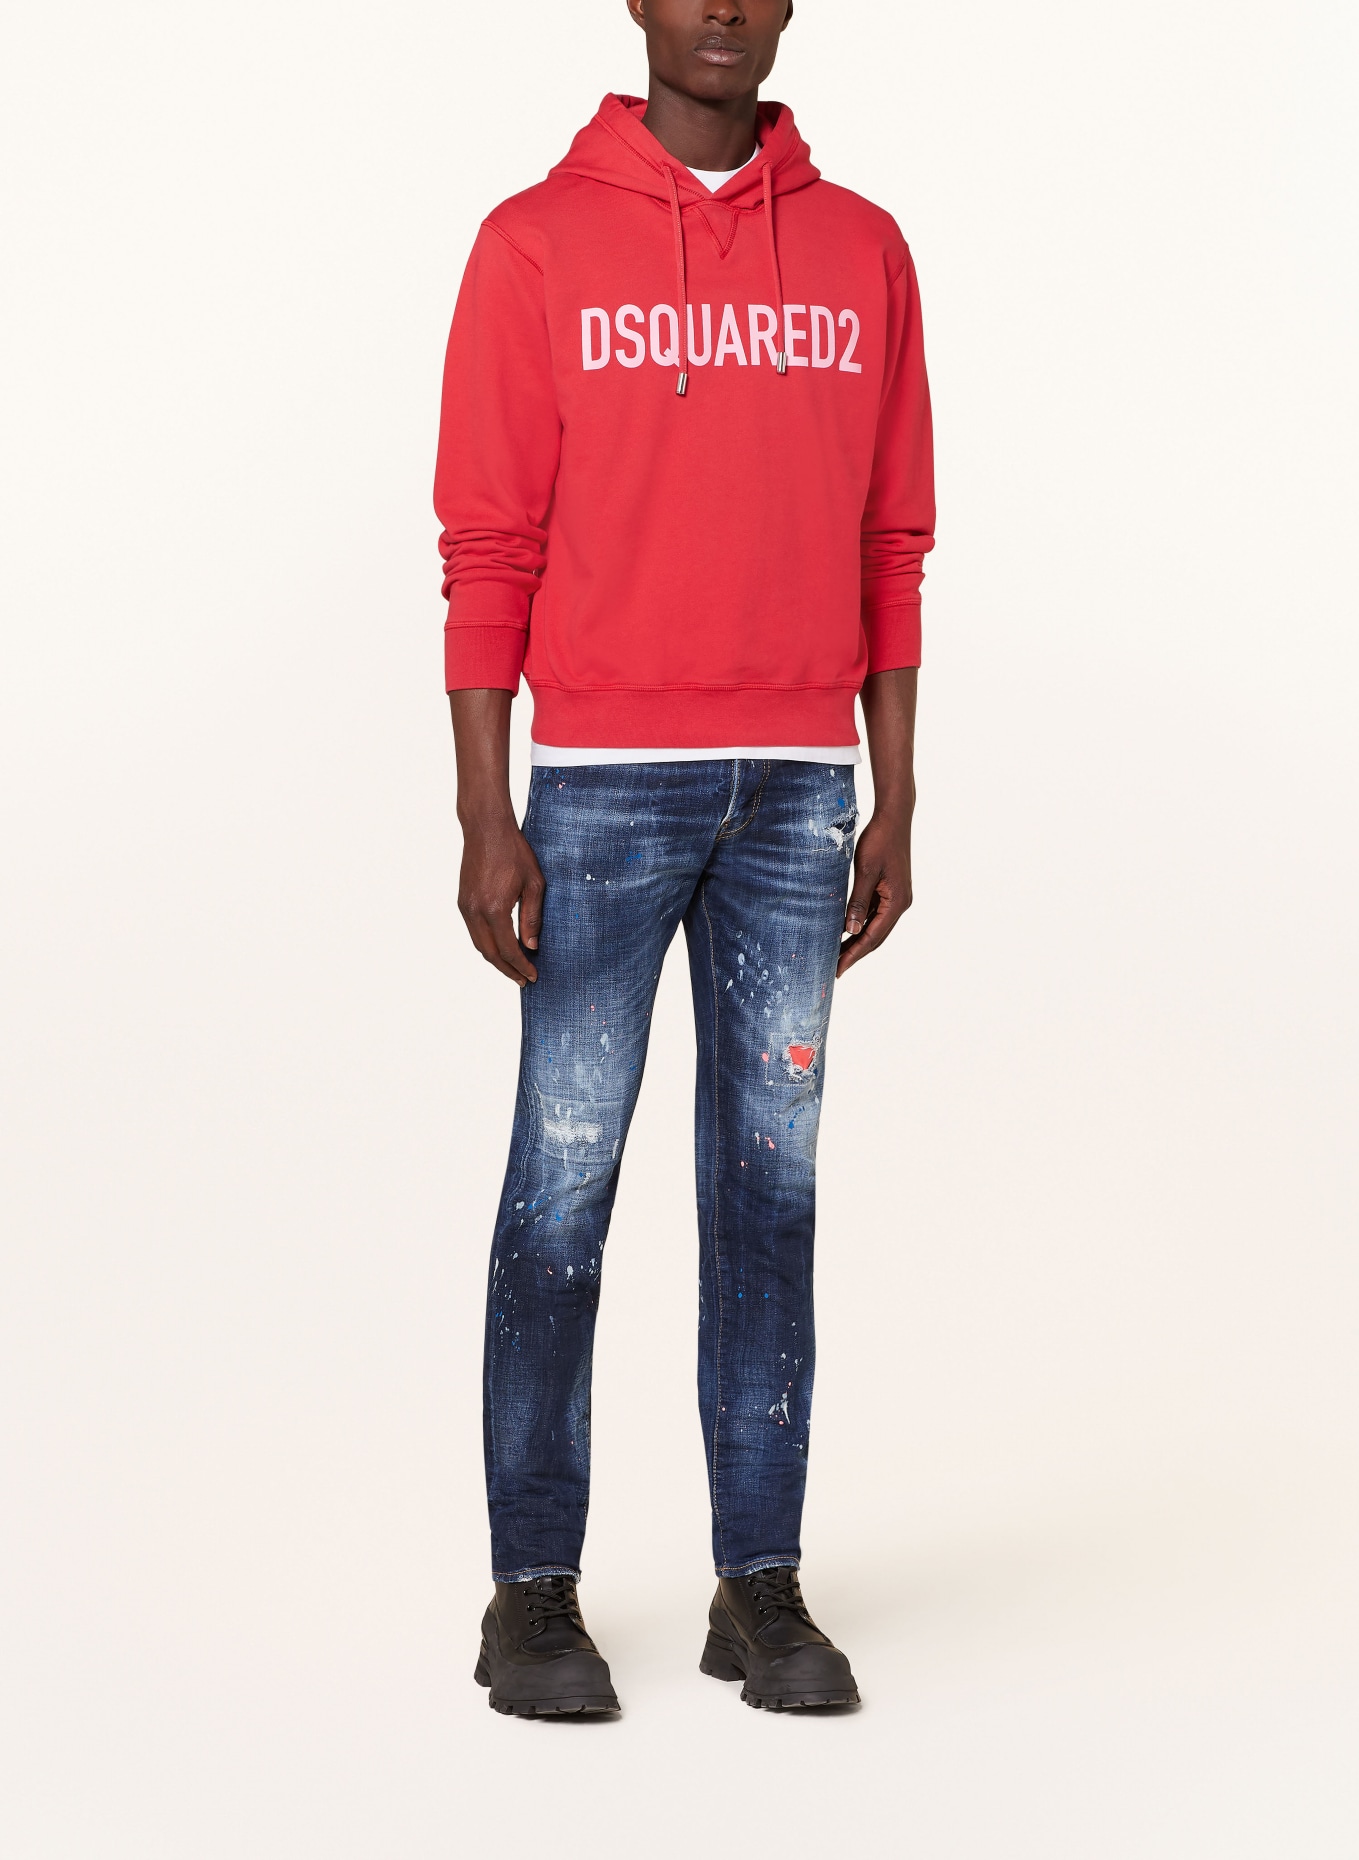 DSQUARED2 Destroyed Jeans COOL GUY Slim Fit, Farbe: 470 BLUE NAVY (Bild 2)